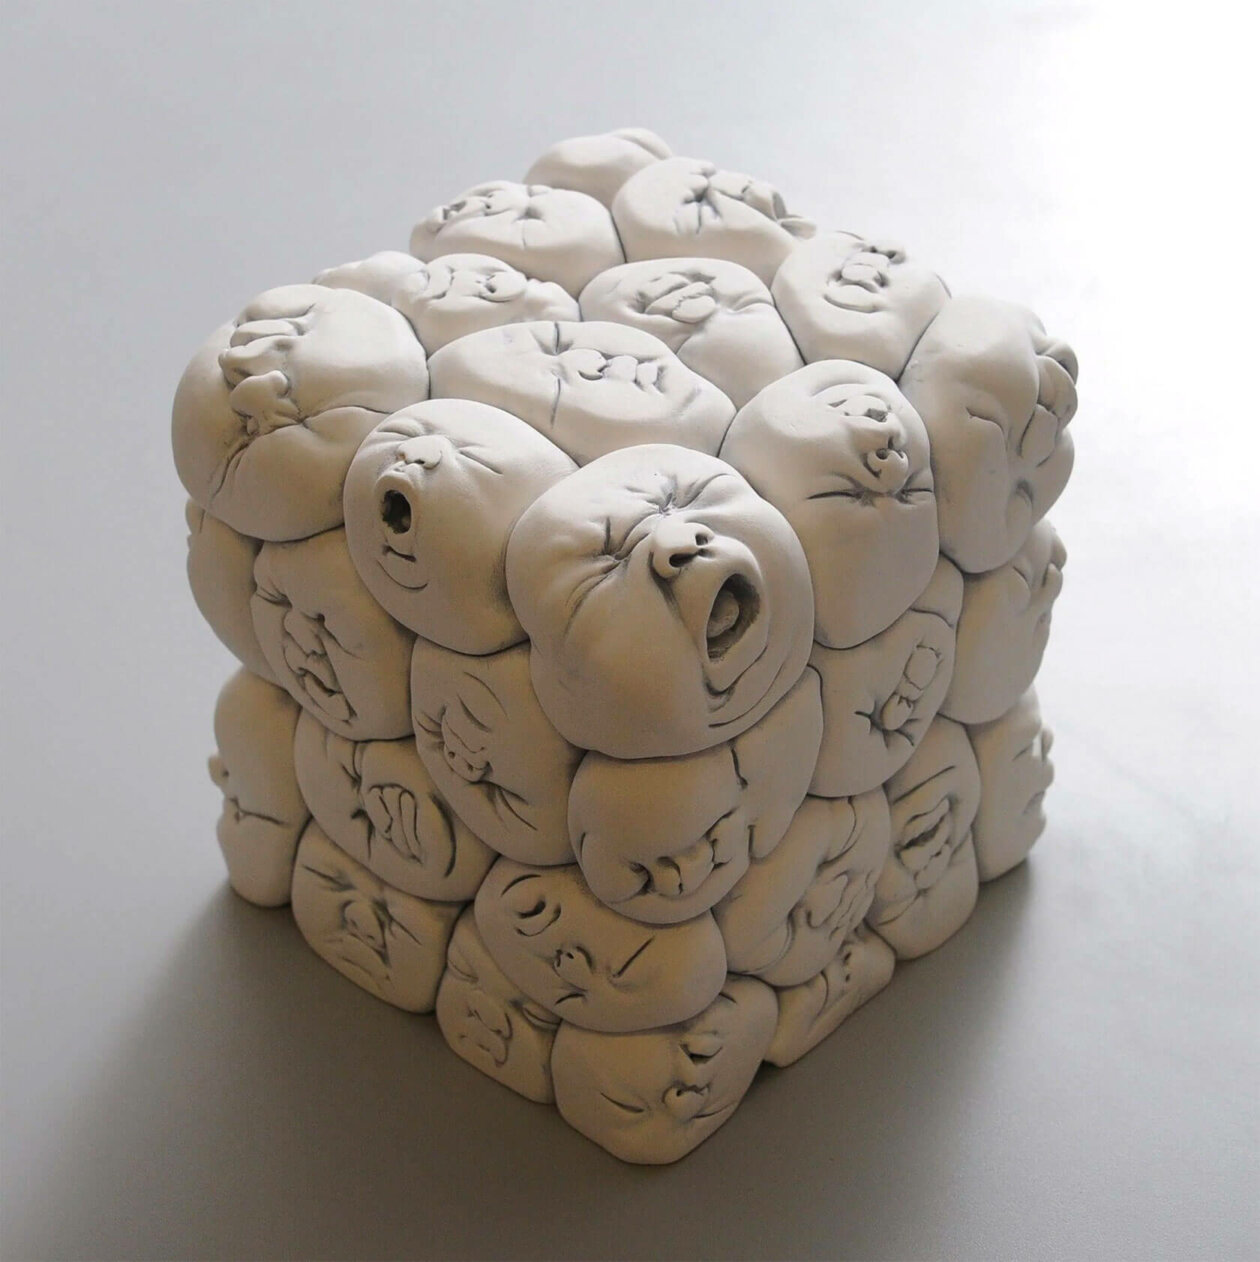 Distorted Baby Faces, Surreal Ceramic Sculptures By Johnson Tsang (22)